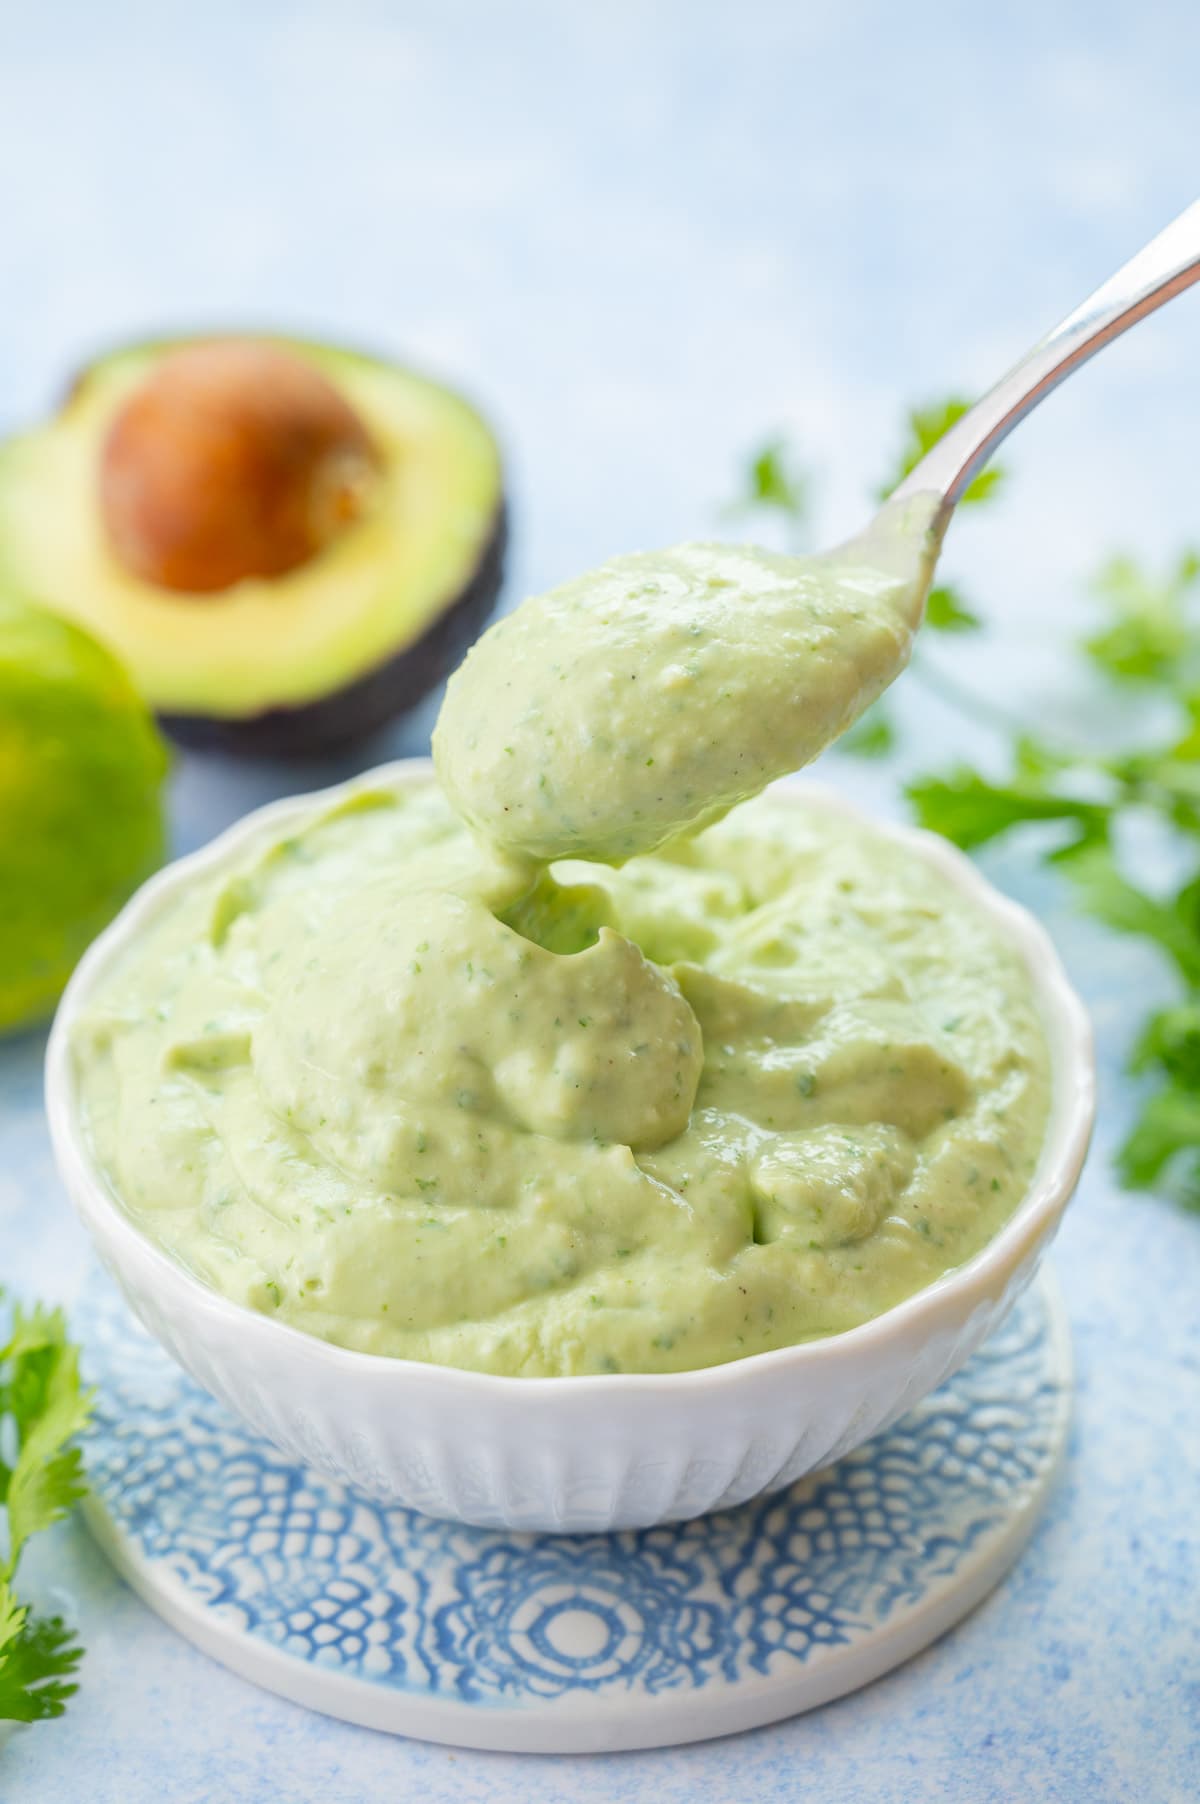 Avocado sauce in a white bowl on a blue background. The sauce is being scooped with a spoon.